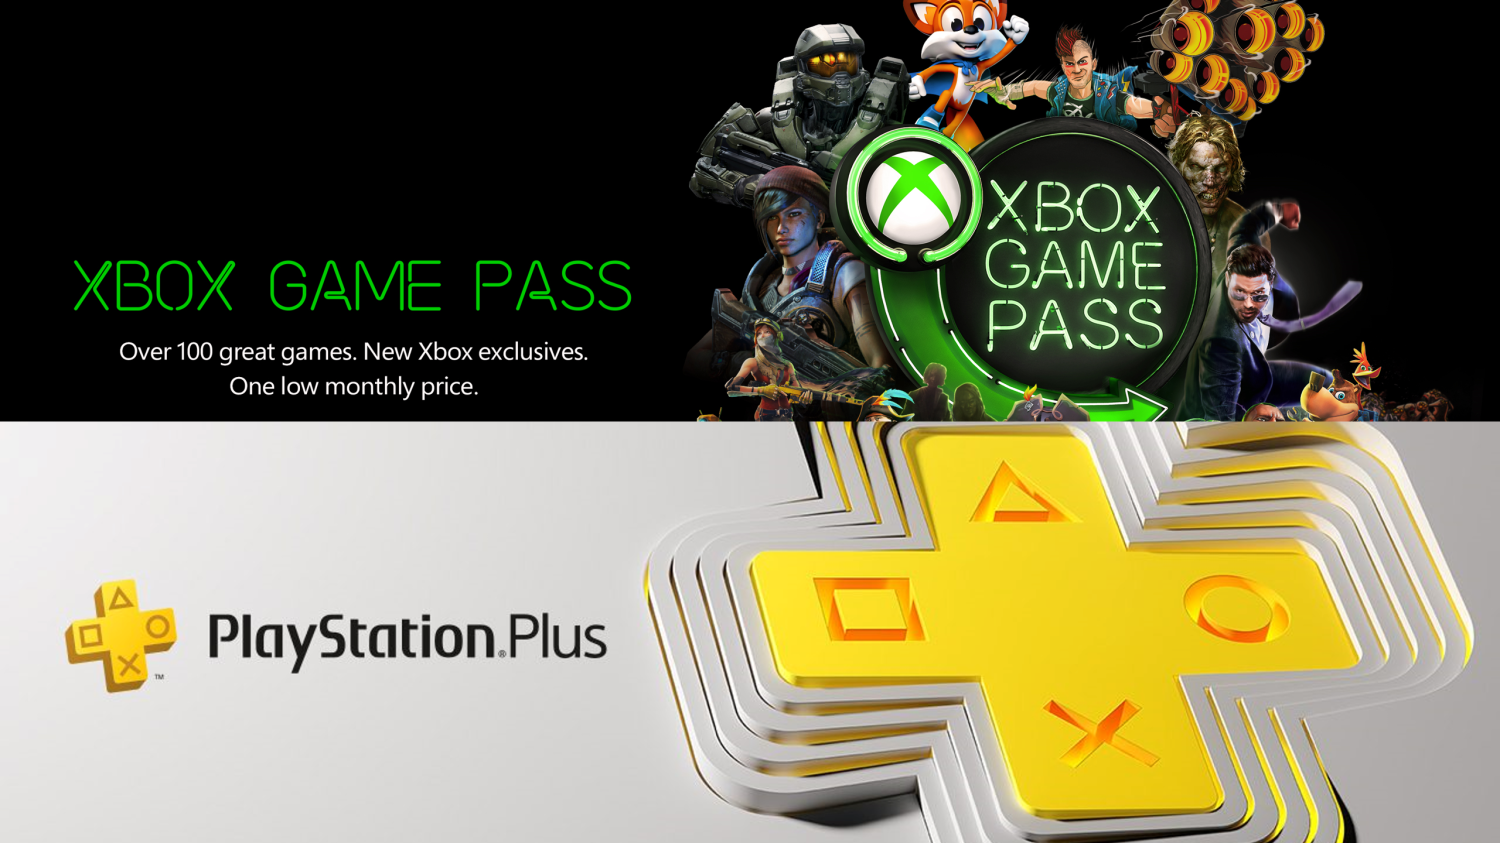 The new Transform Plus game pass is now available to purchase. It